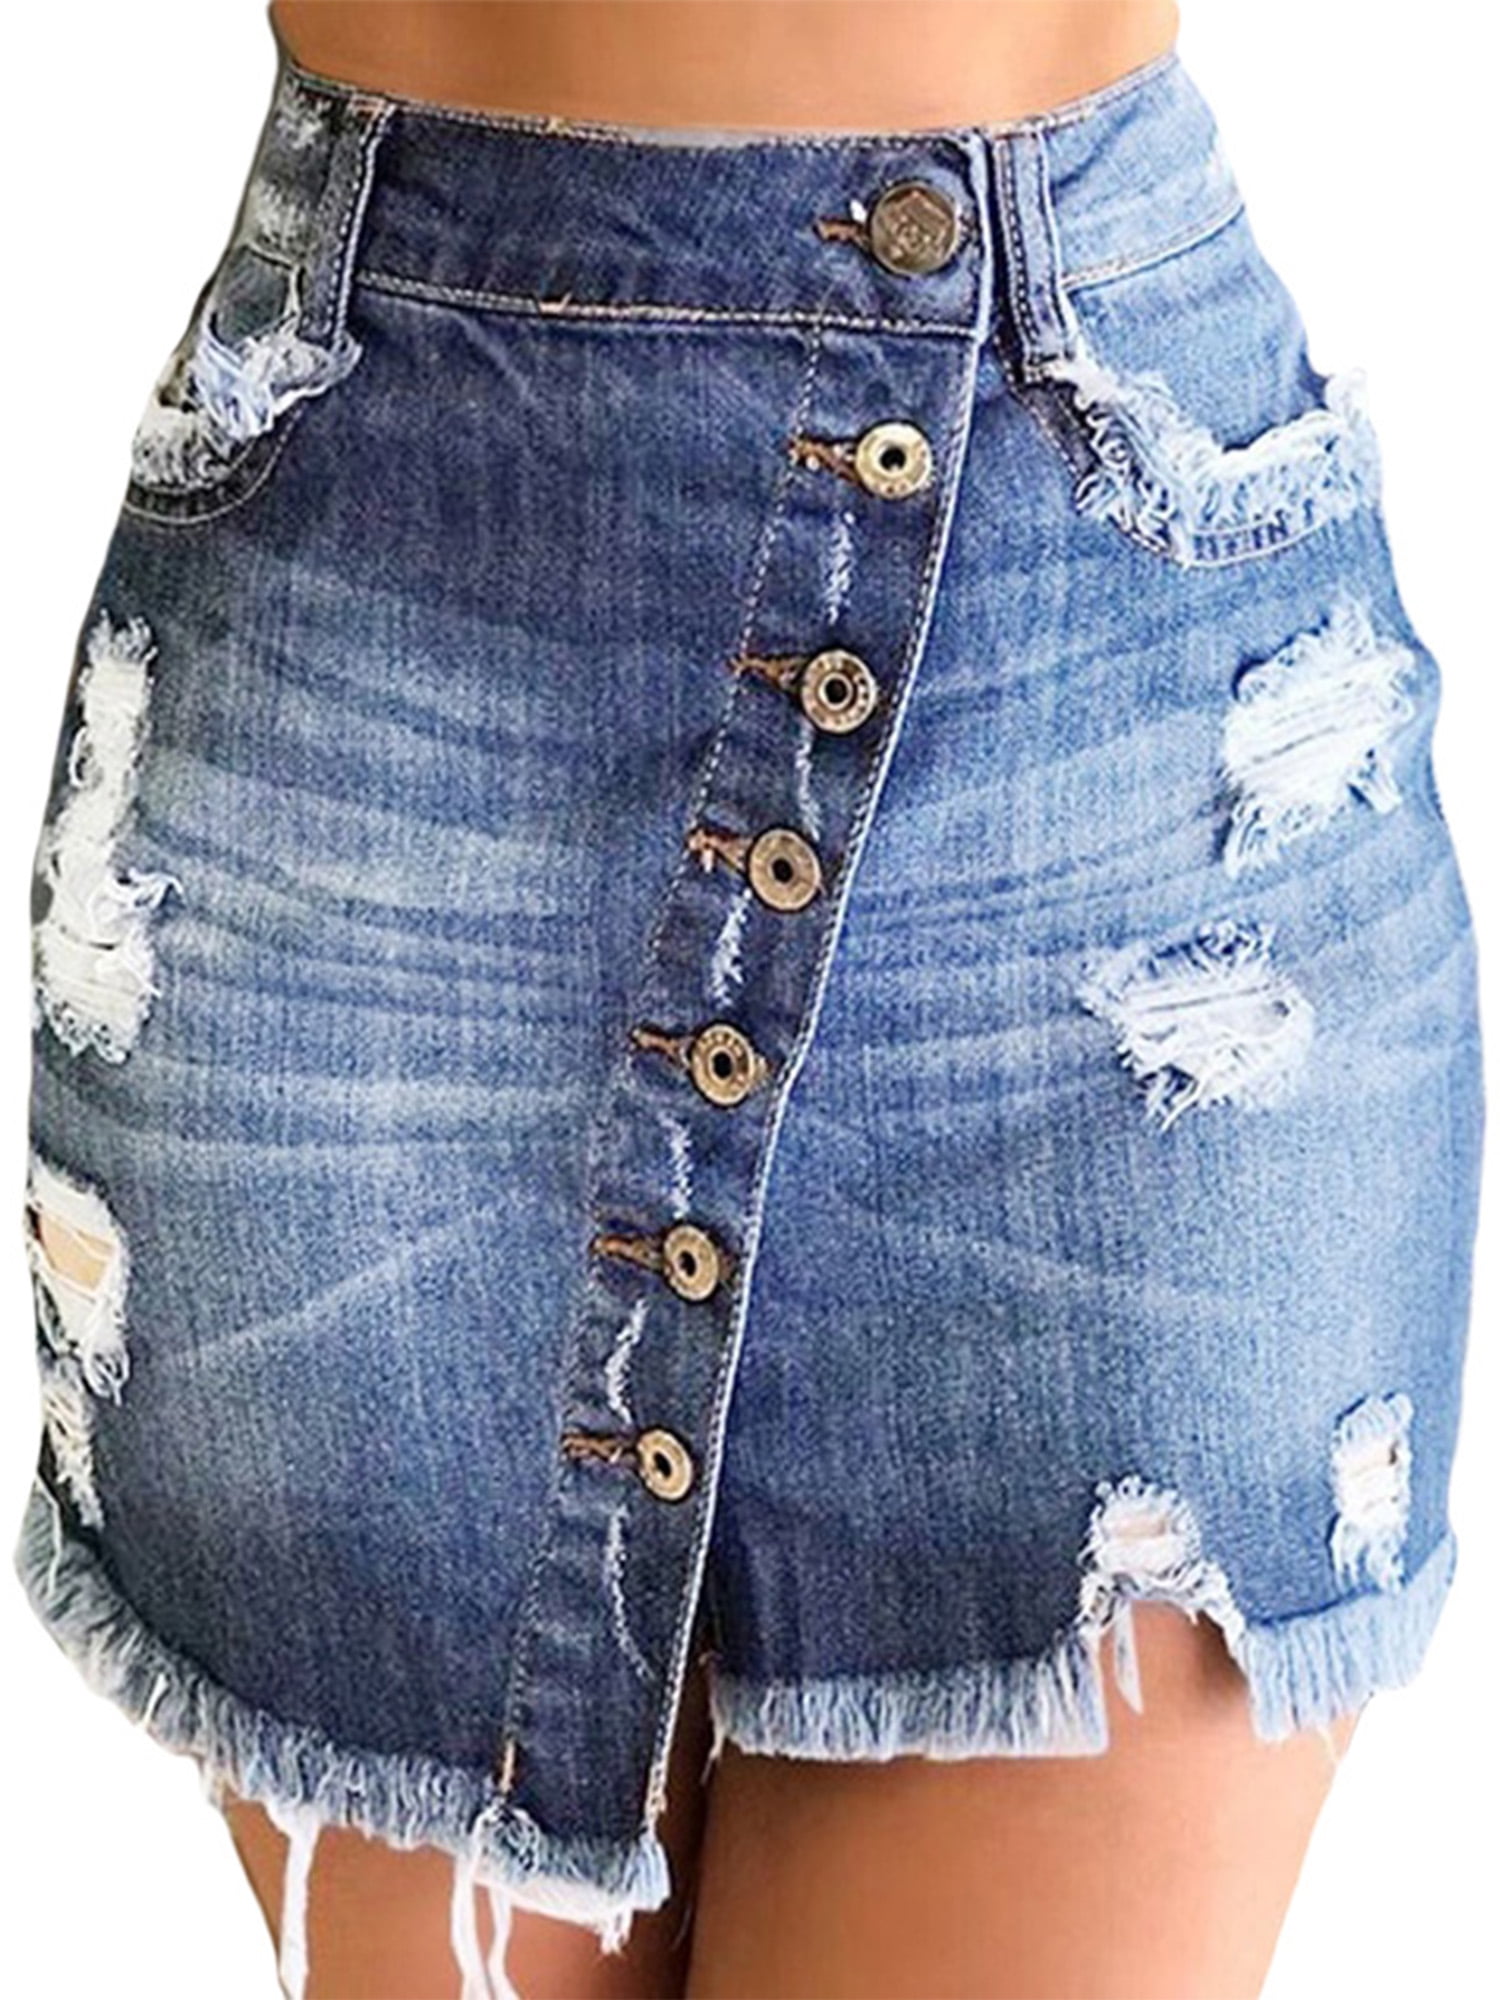 Womens DENIM JACKET Oversized Top Jeans Bodycon Ripped Frayed Pencil Midi Skirt 